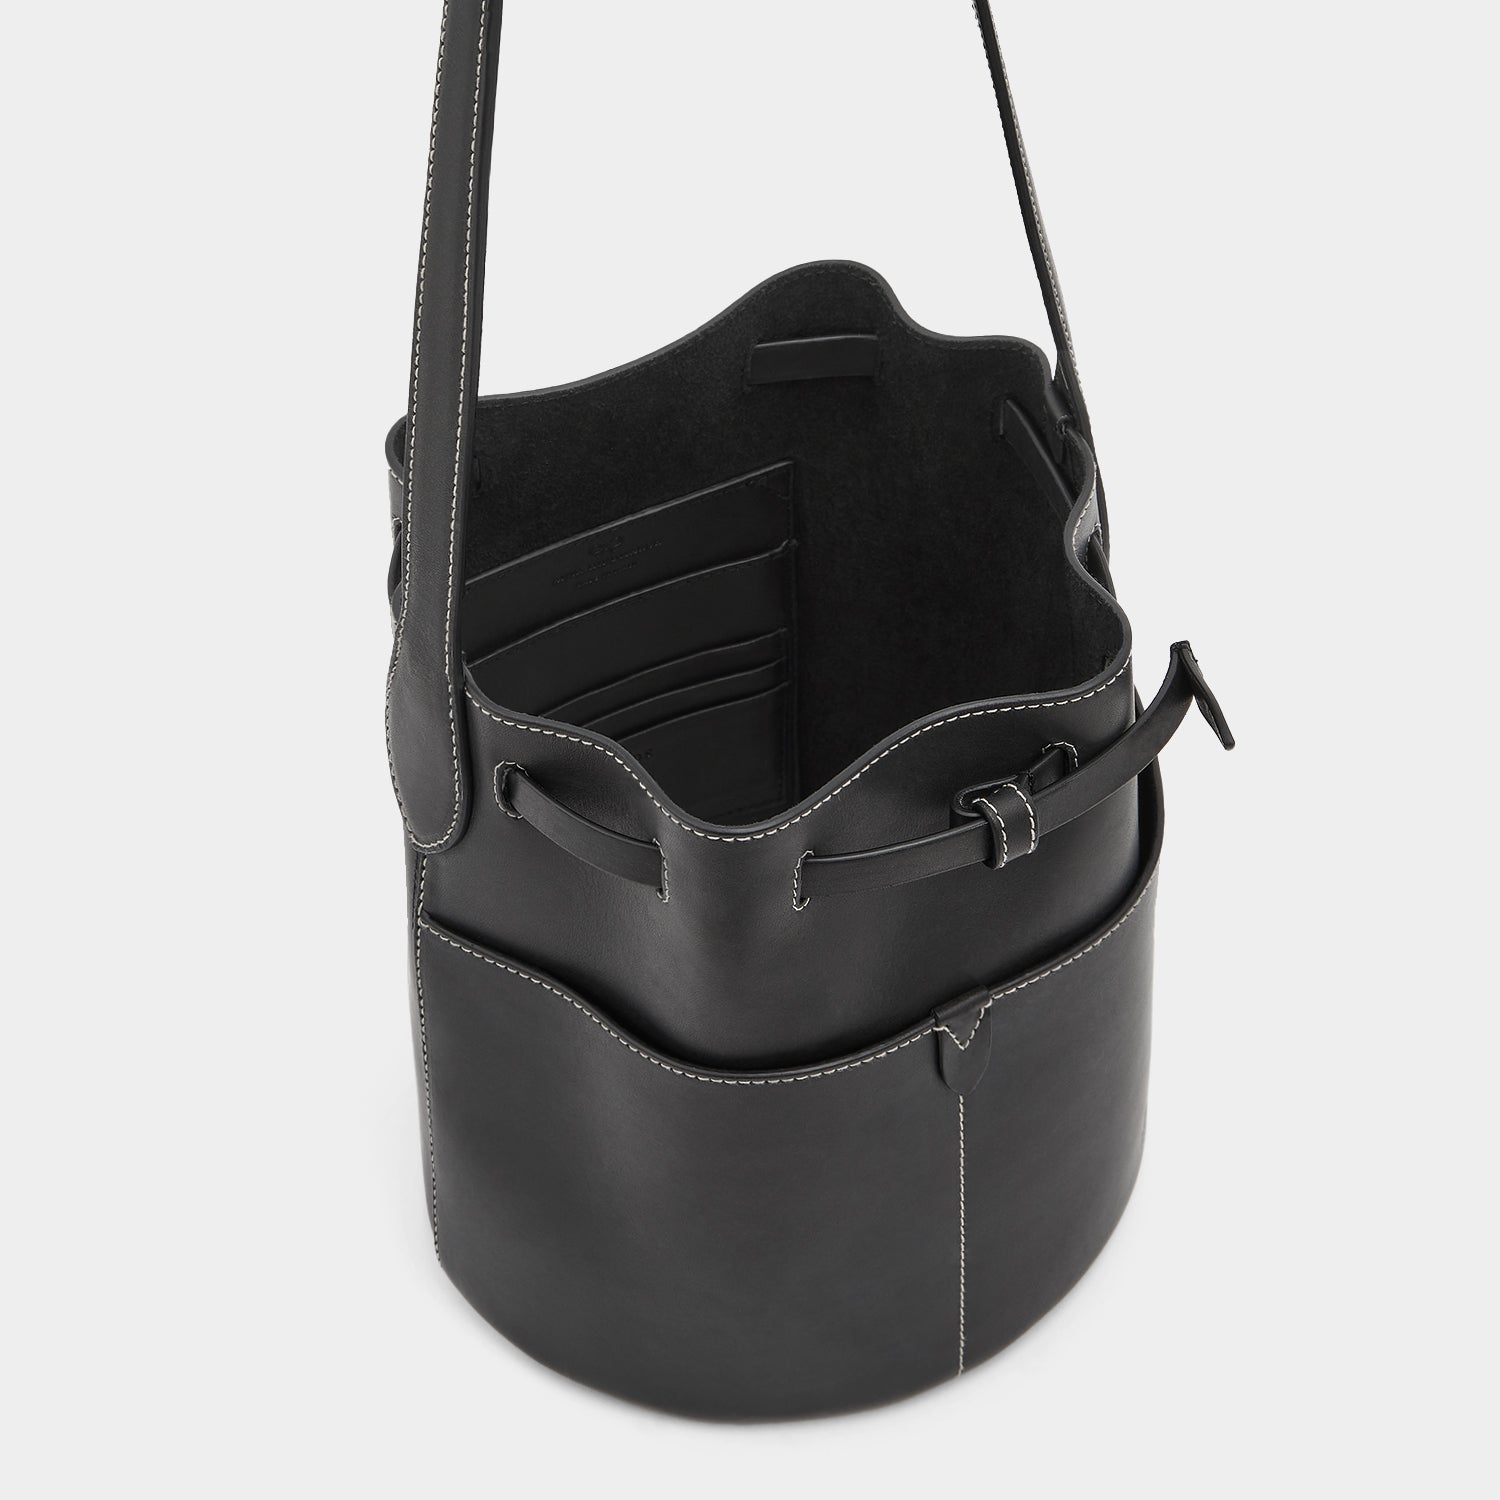 「Return to Nature」バケットバッグ スモール -

                  
                    Compostable Leather in Black -
                  

                  Anya Hindmarch JP
